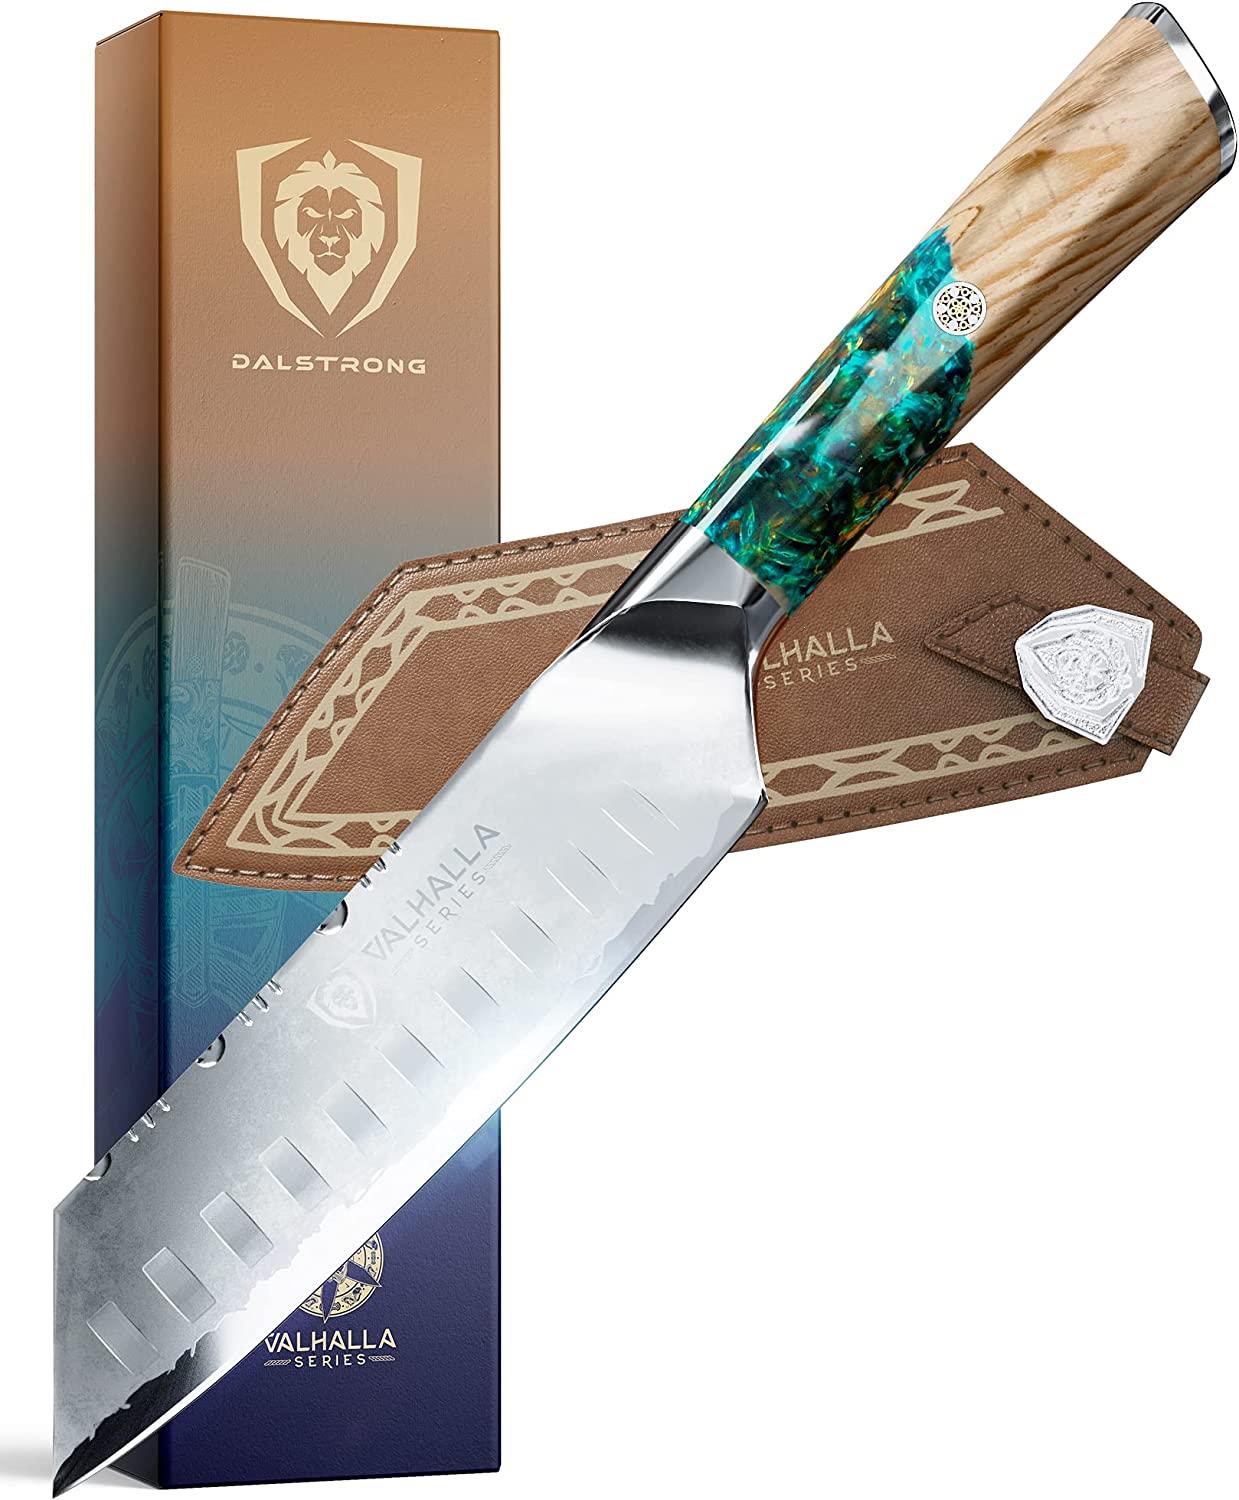 Dalstrong 7 Santoku - Valhalla Series - High Carbon Steel - Resin Handle -  Leather Sheath